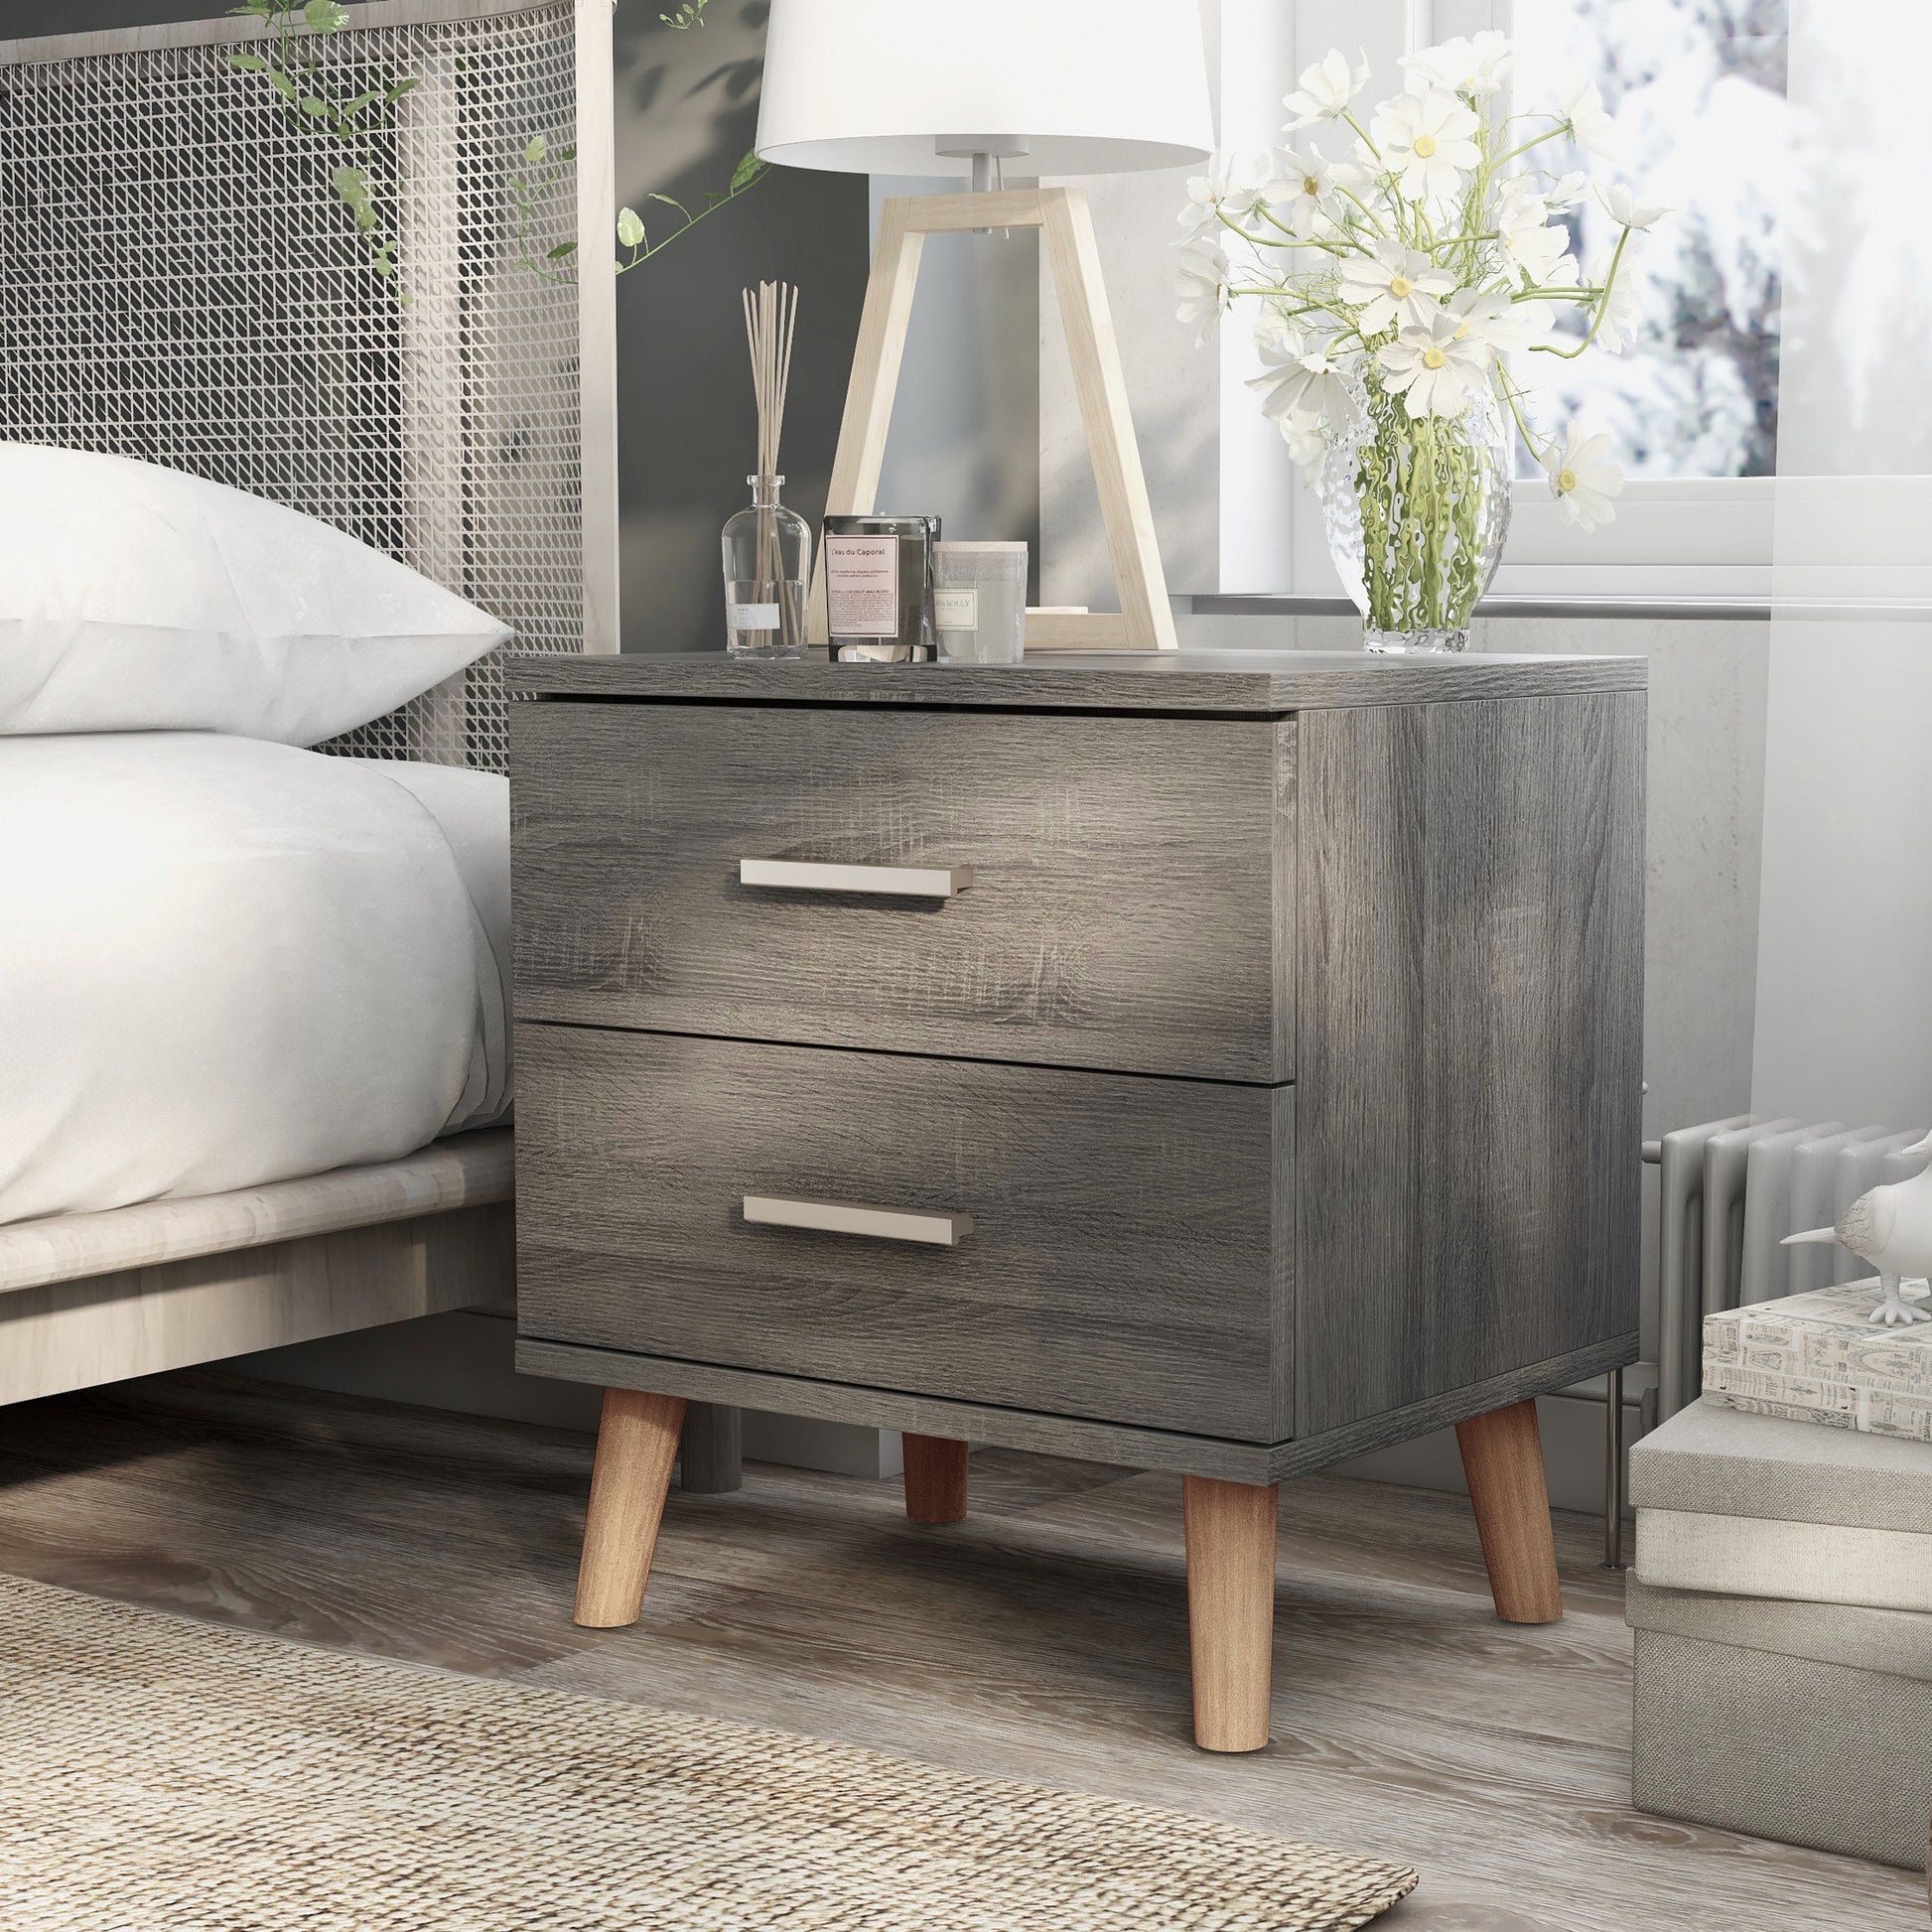 Left angled mid-century modern distressed gray two-drawer nightstand in a bedroom with accessories